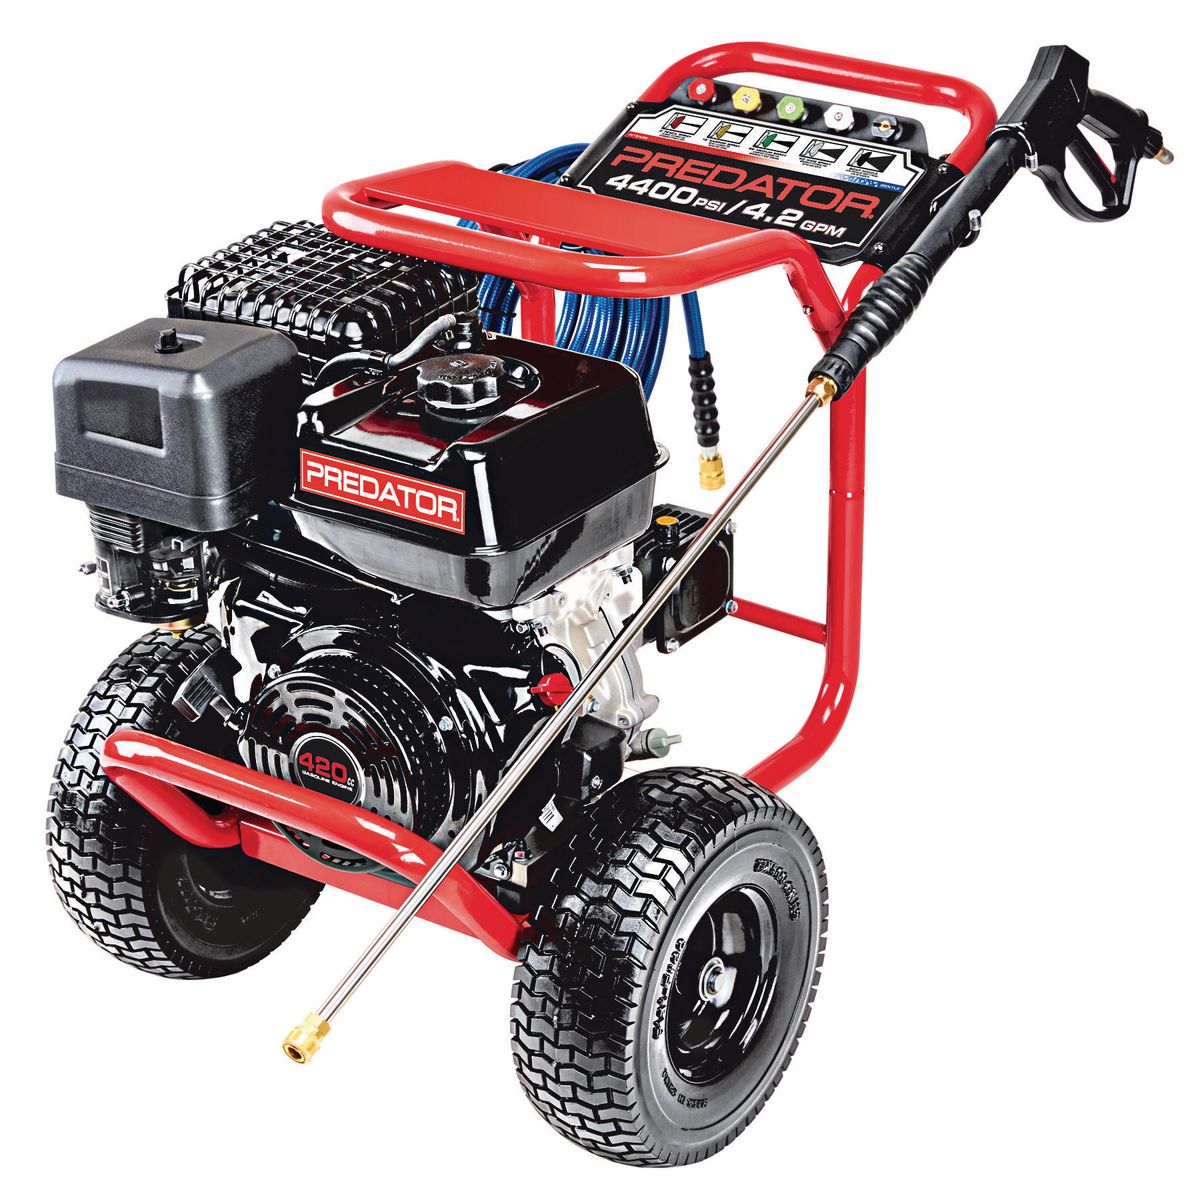 PREDATOR 4400 PSI 4.2 GPM 13 HP (420cc) Commercial Duty Pressure Washer CARB - Item 64199